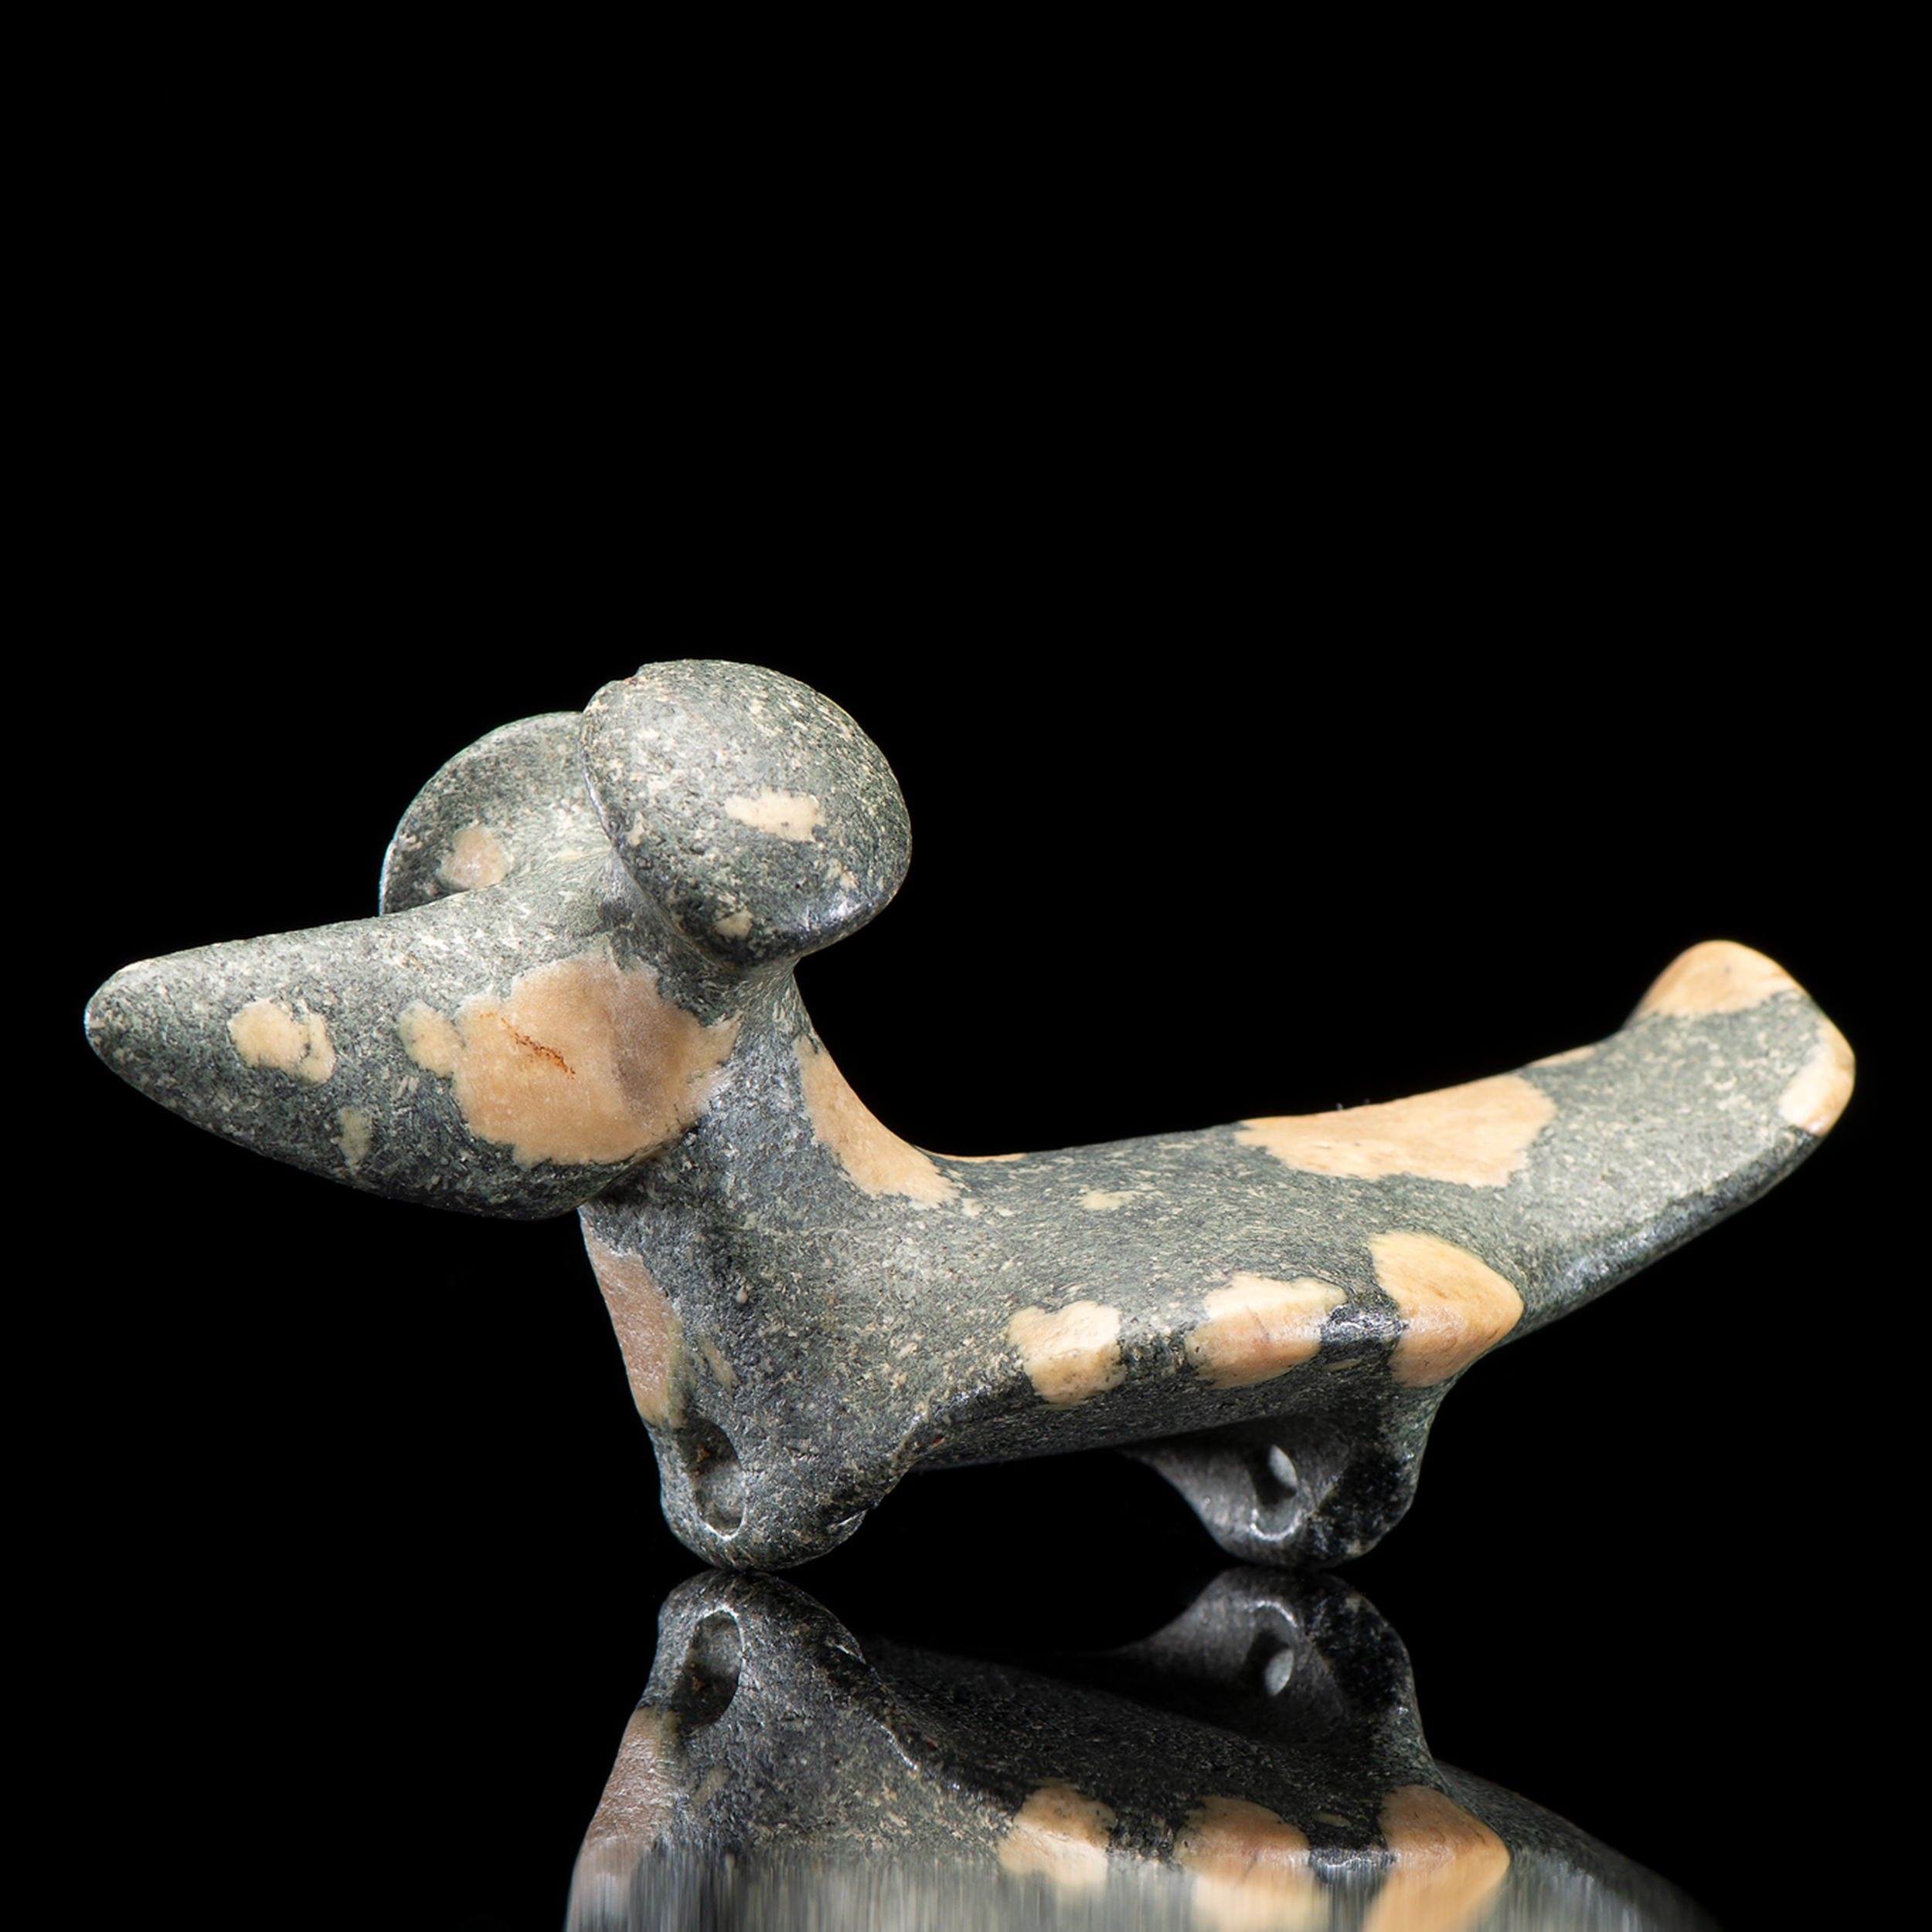 A porphyry popeye fantail birdstone, created by the people of the Glacial Kame Culture sometime between 3,000 and 500 BCE in what is now DeKalb County, Indiana. It looks like a small dog, except it has two loops where the front and back feet should be. It is slate gray with pale cream-colored blobs of varying sizes across its body. It has two wide nailhead-like protuberances where its ears should be, but the protuberances are called "eyes".